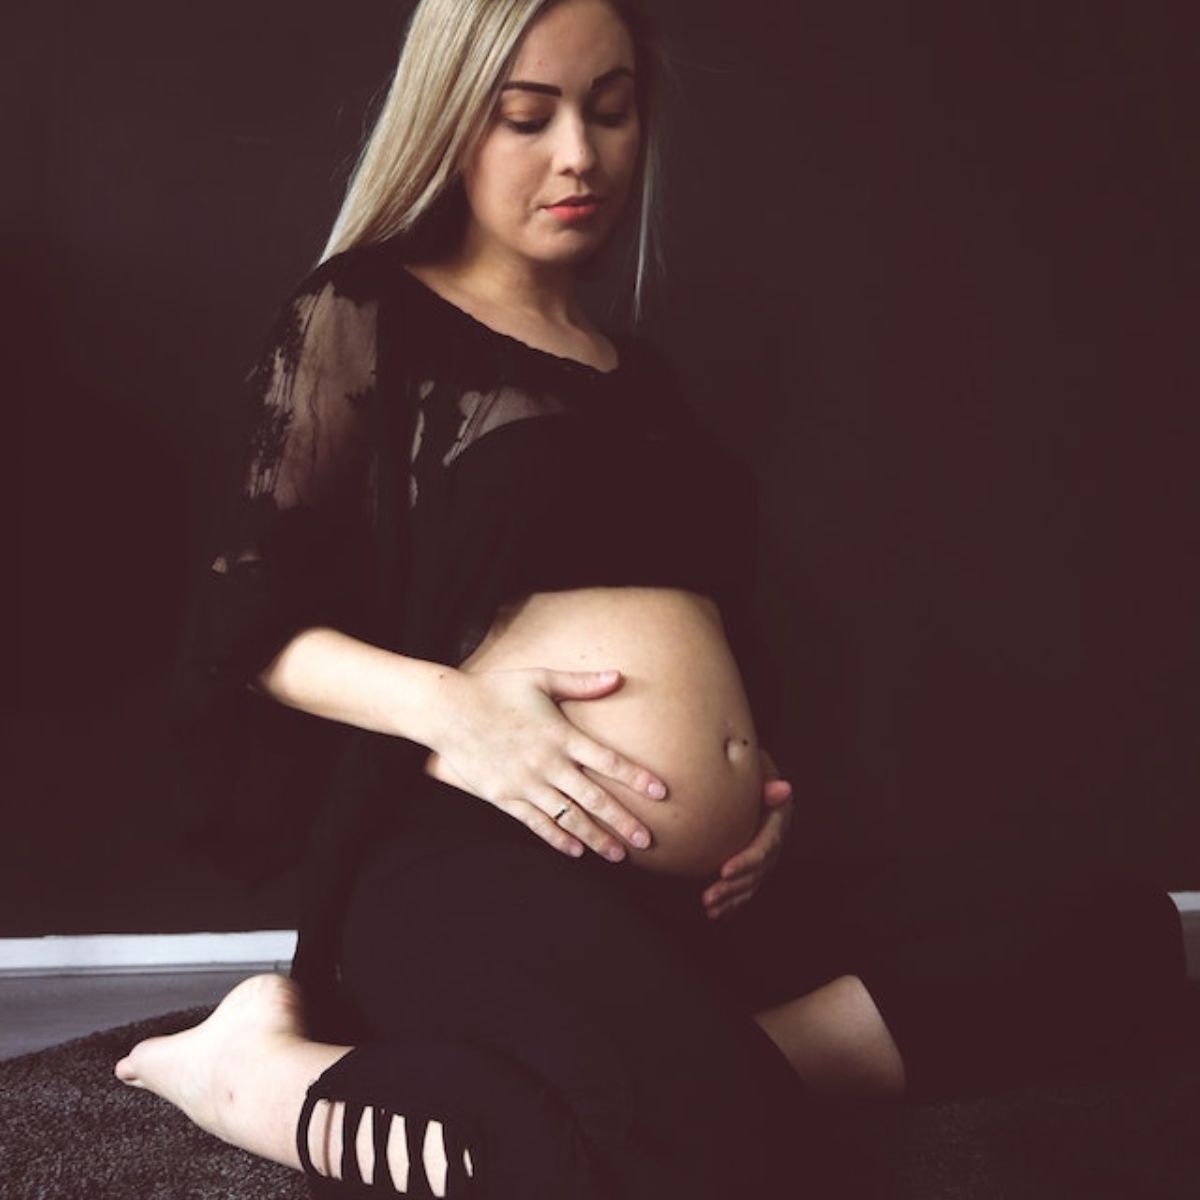 A woman is sitting on her knees on a carpeted floor. She is wearing black leggings and a black crop top. She has both hands on her pregnant stomach.